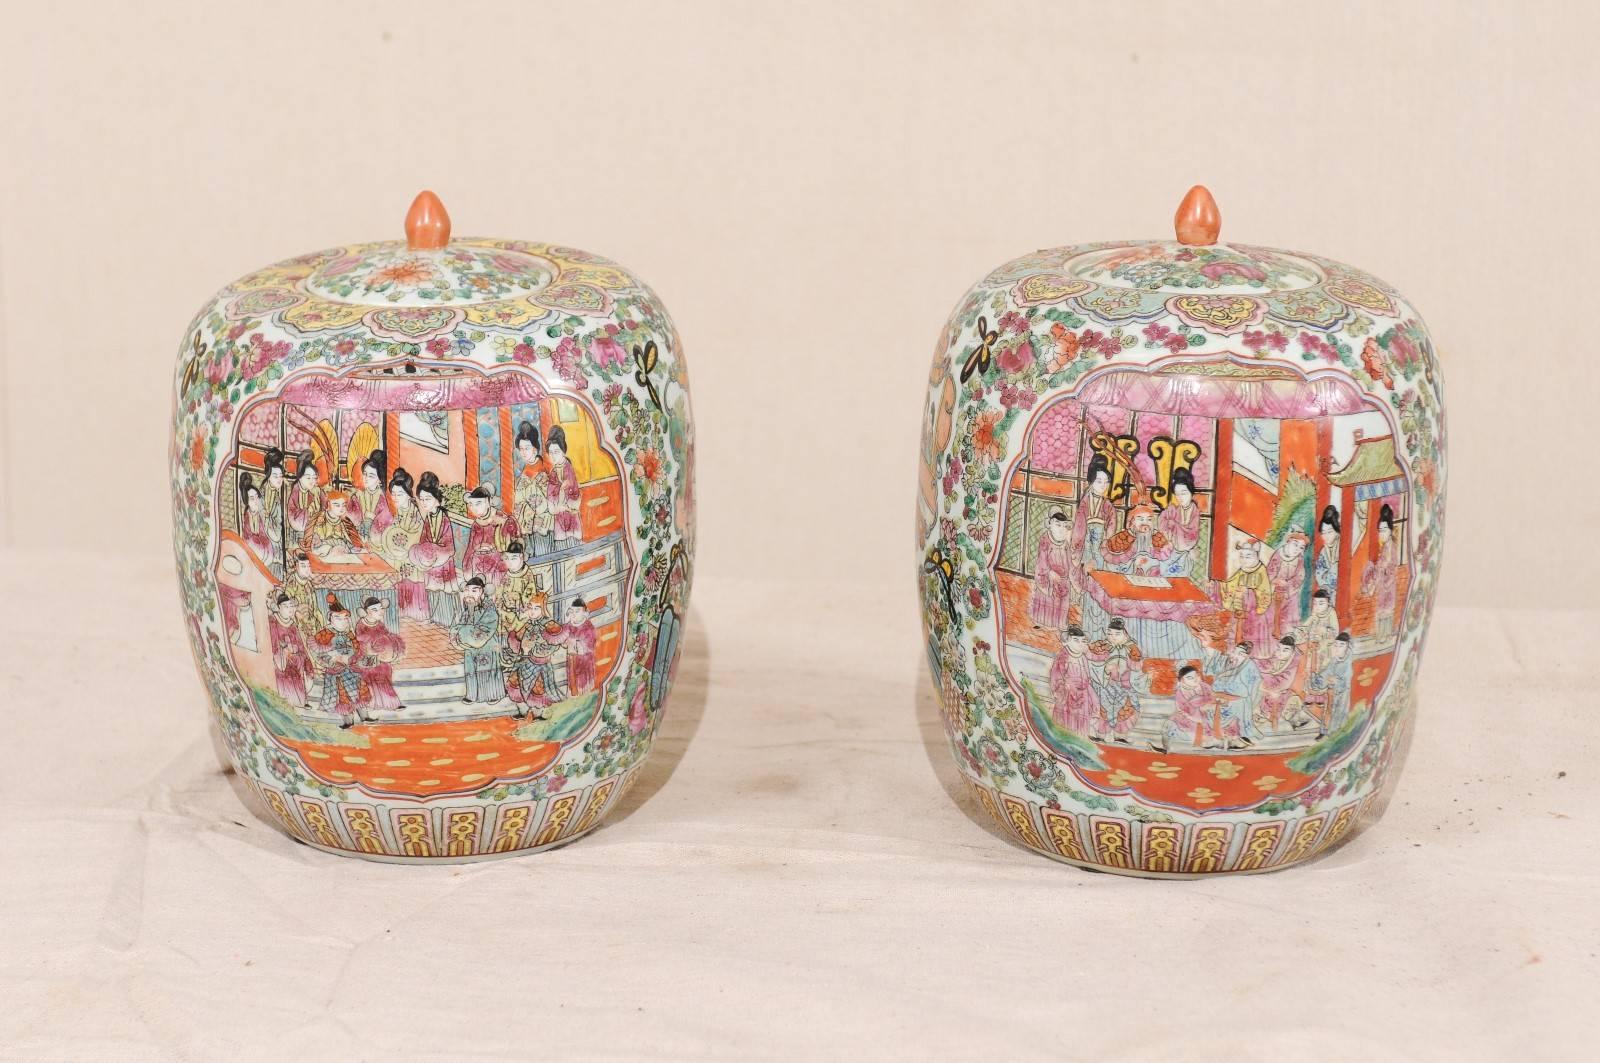 Pair of Painted Porcelain Chinese Famille Rose Jars Featuring a Palace Scene 2